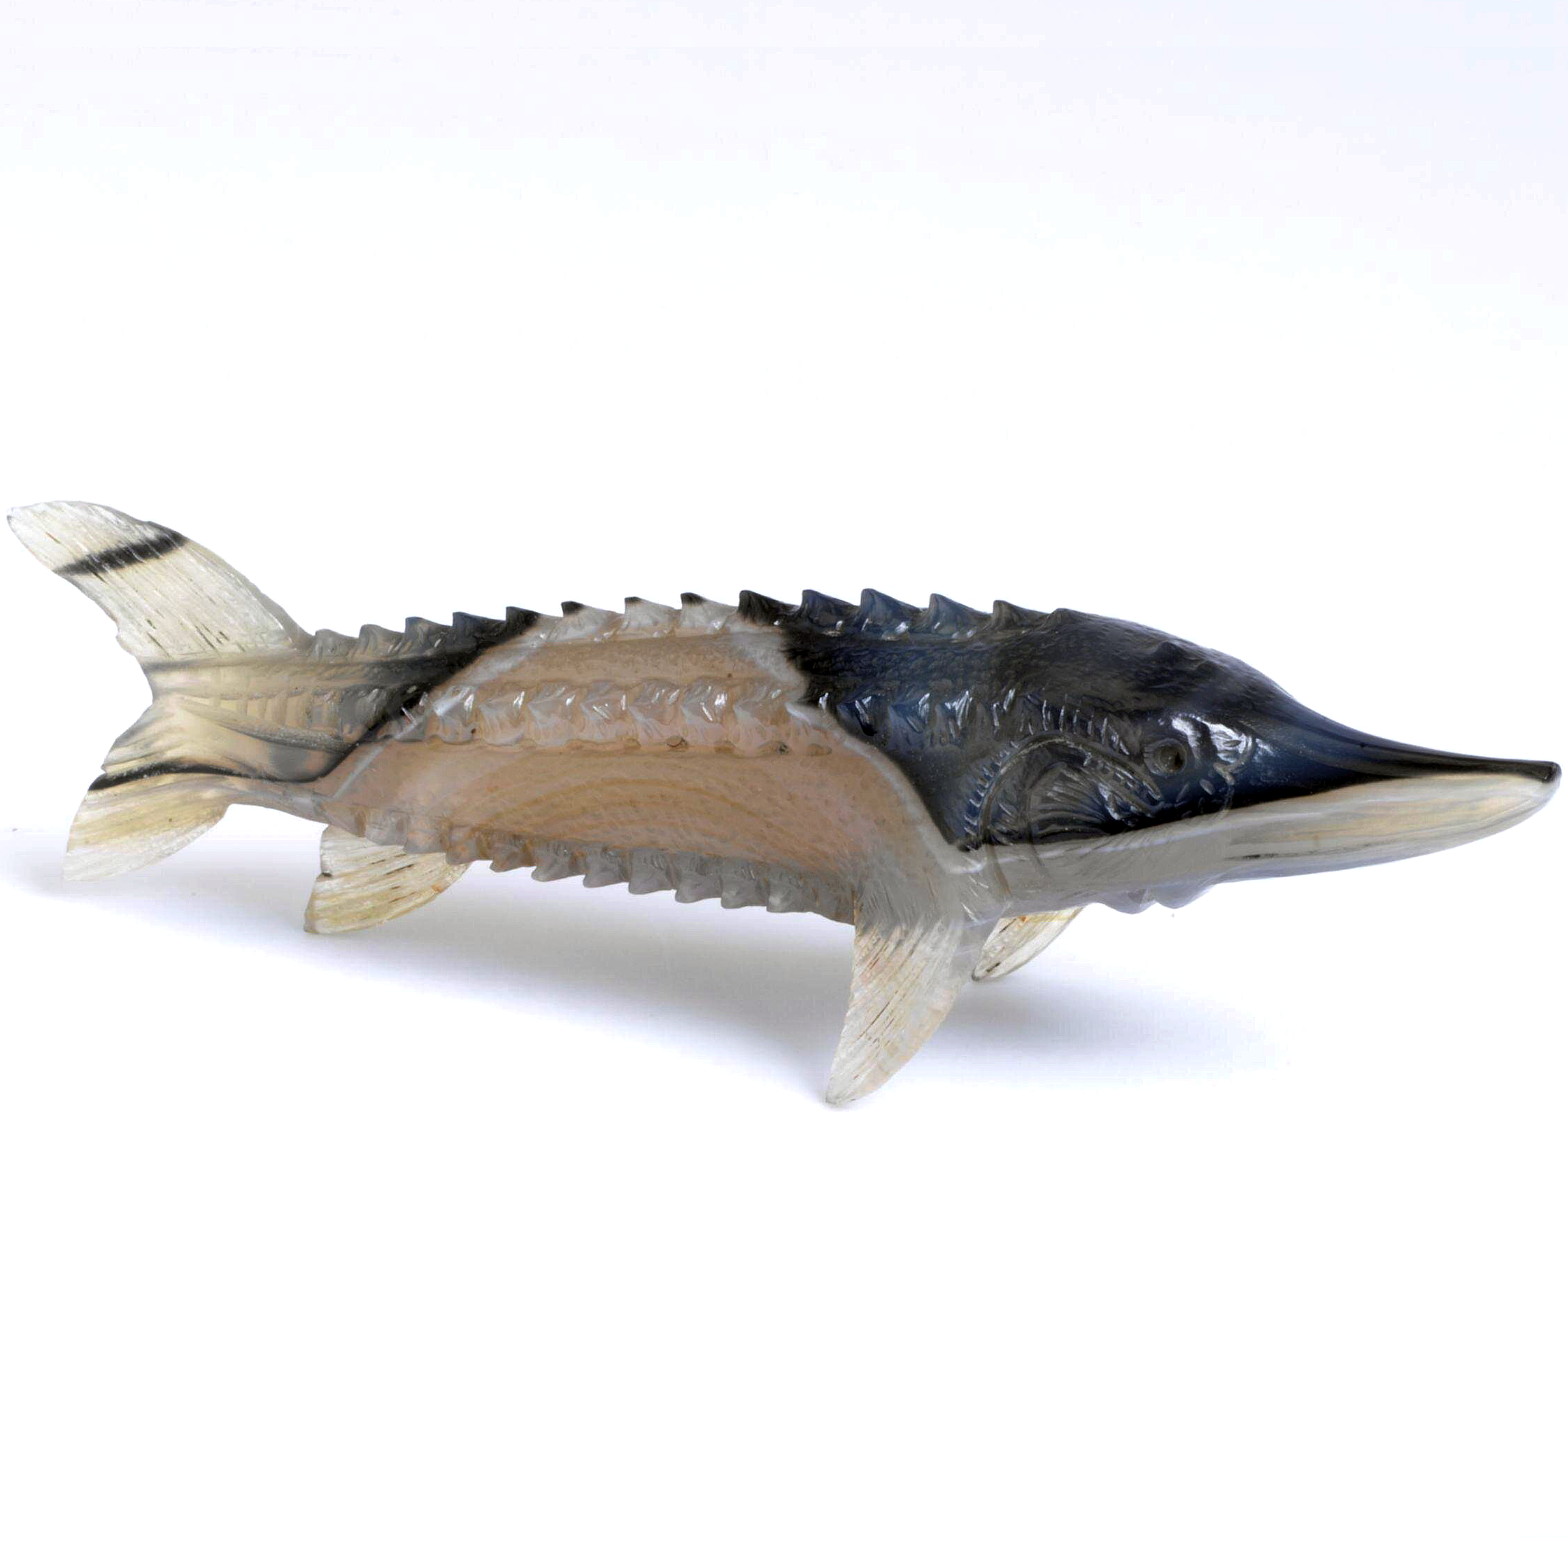 Faberge model of Sturgeon. Carved agate. Fish